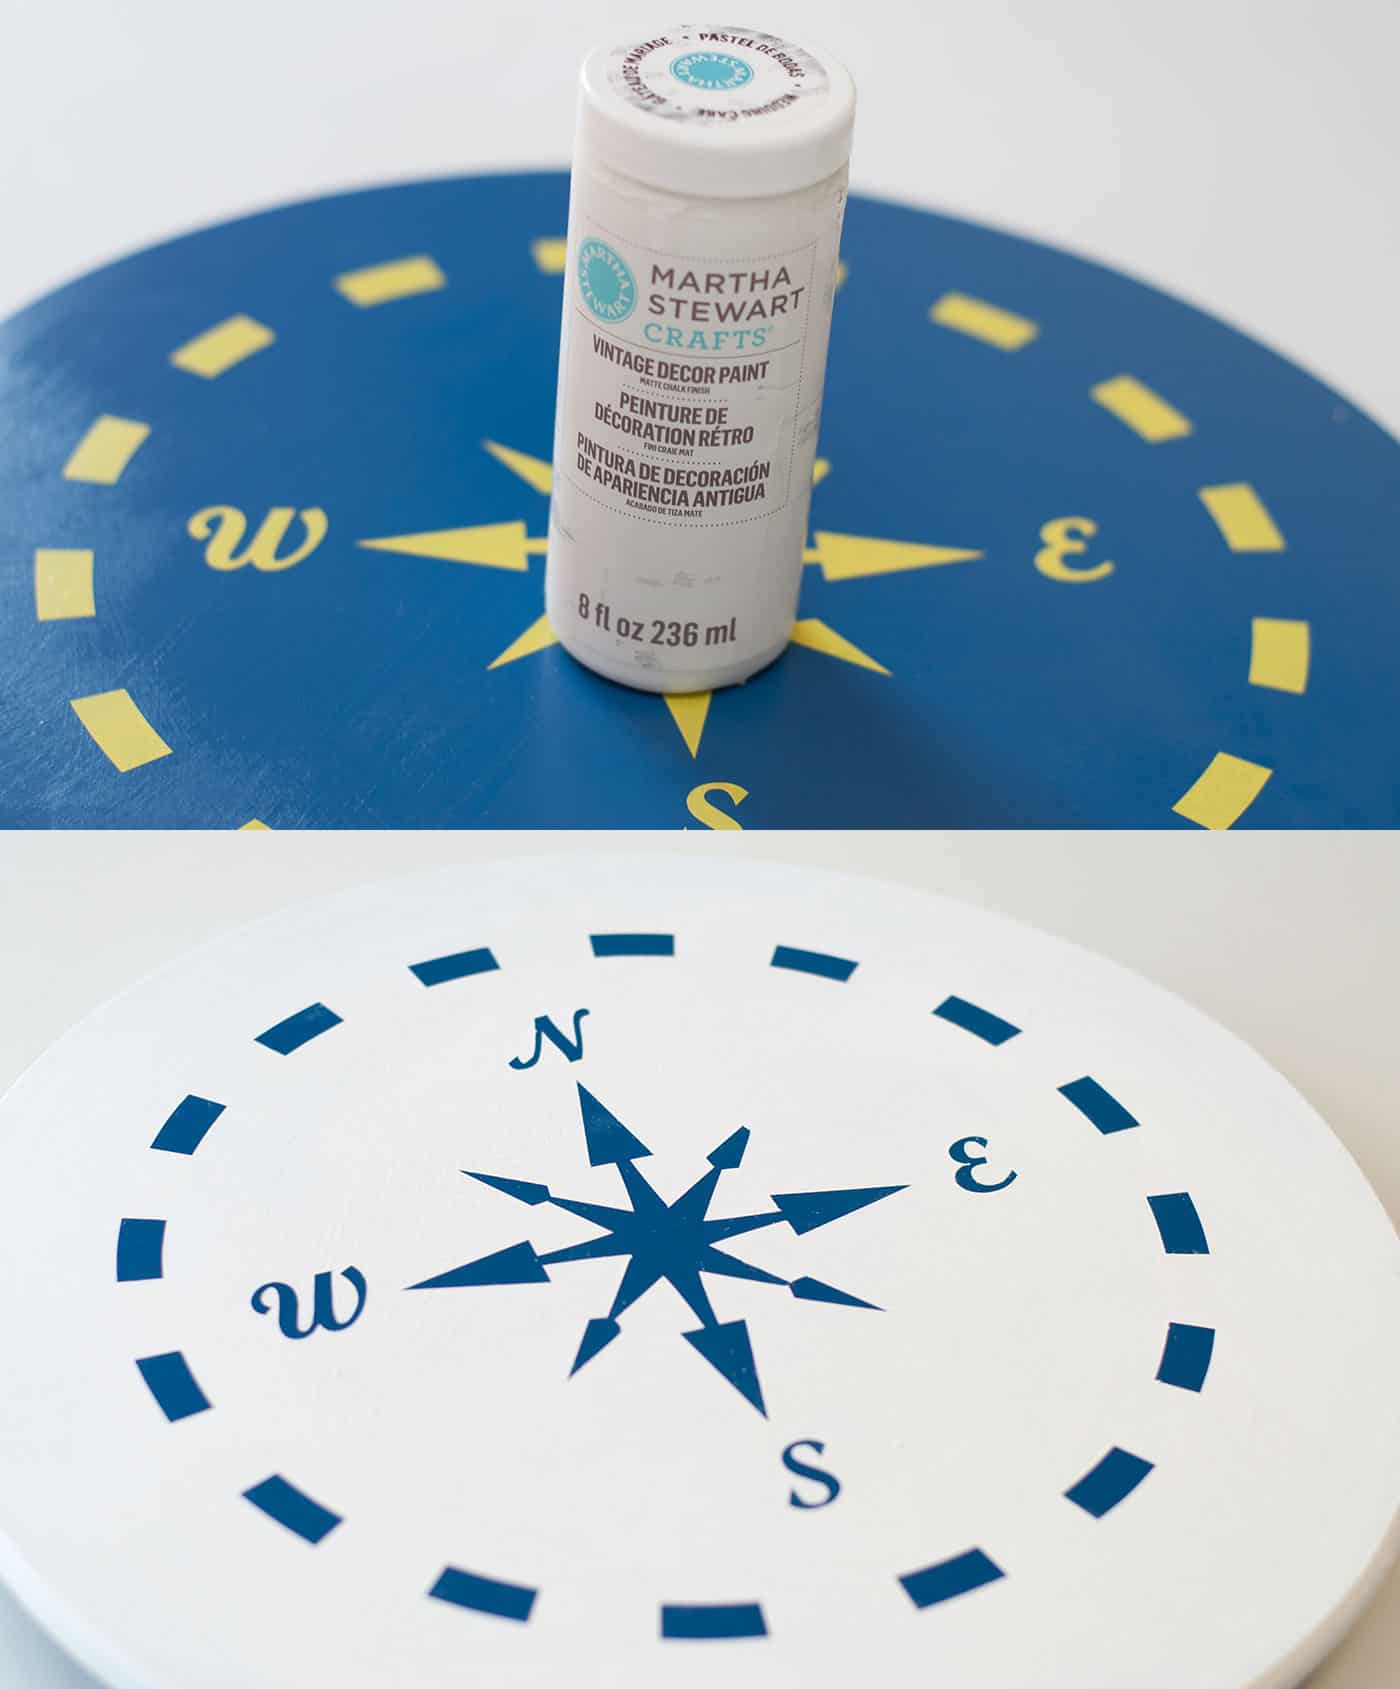 Painting over the stencil on the lazy susan with white chalk paint